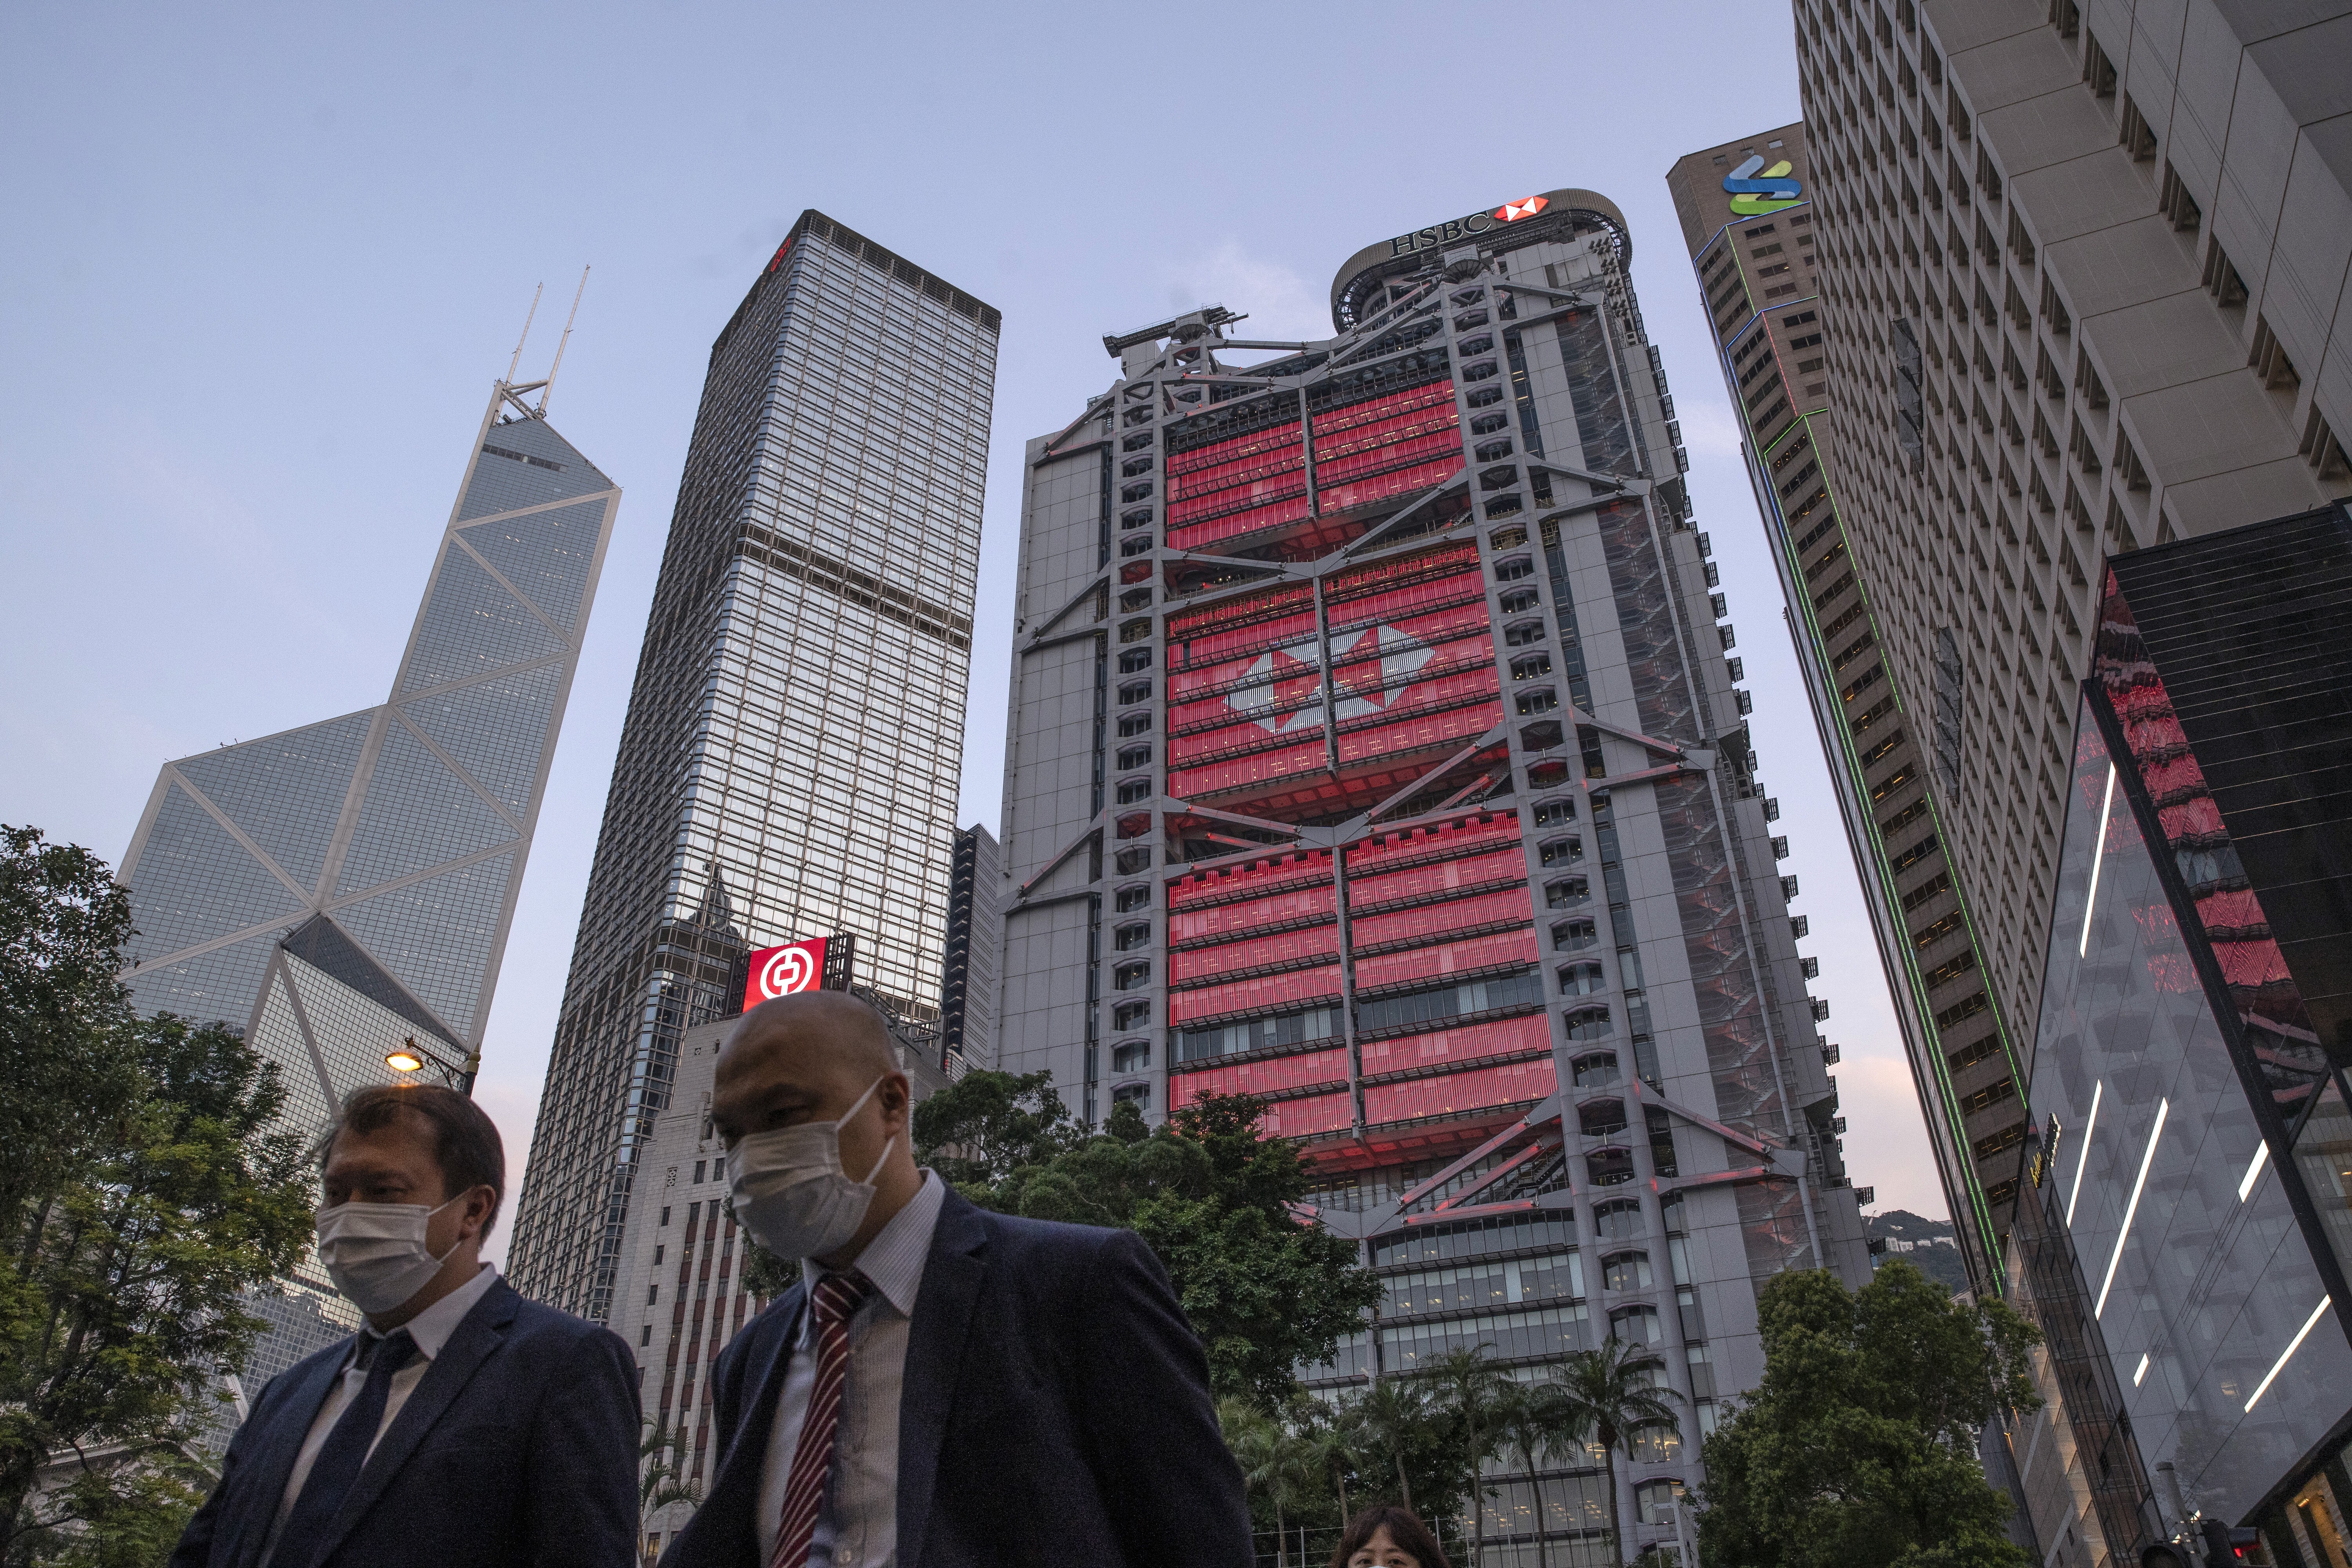 Pedestrians wearing masks walk through Hong Kong’s Central district. Open and honest dialogue with international business over the details of the national security legislation is needed. Photo: Bloomberg